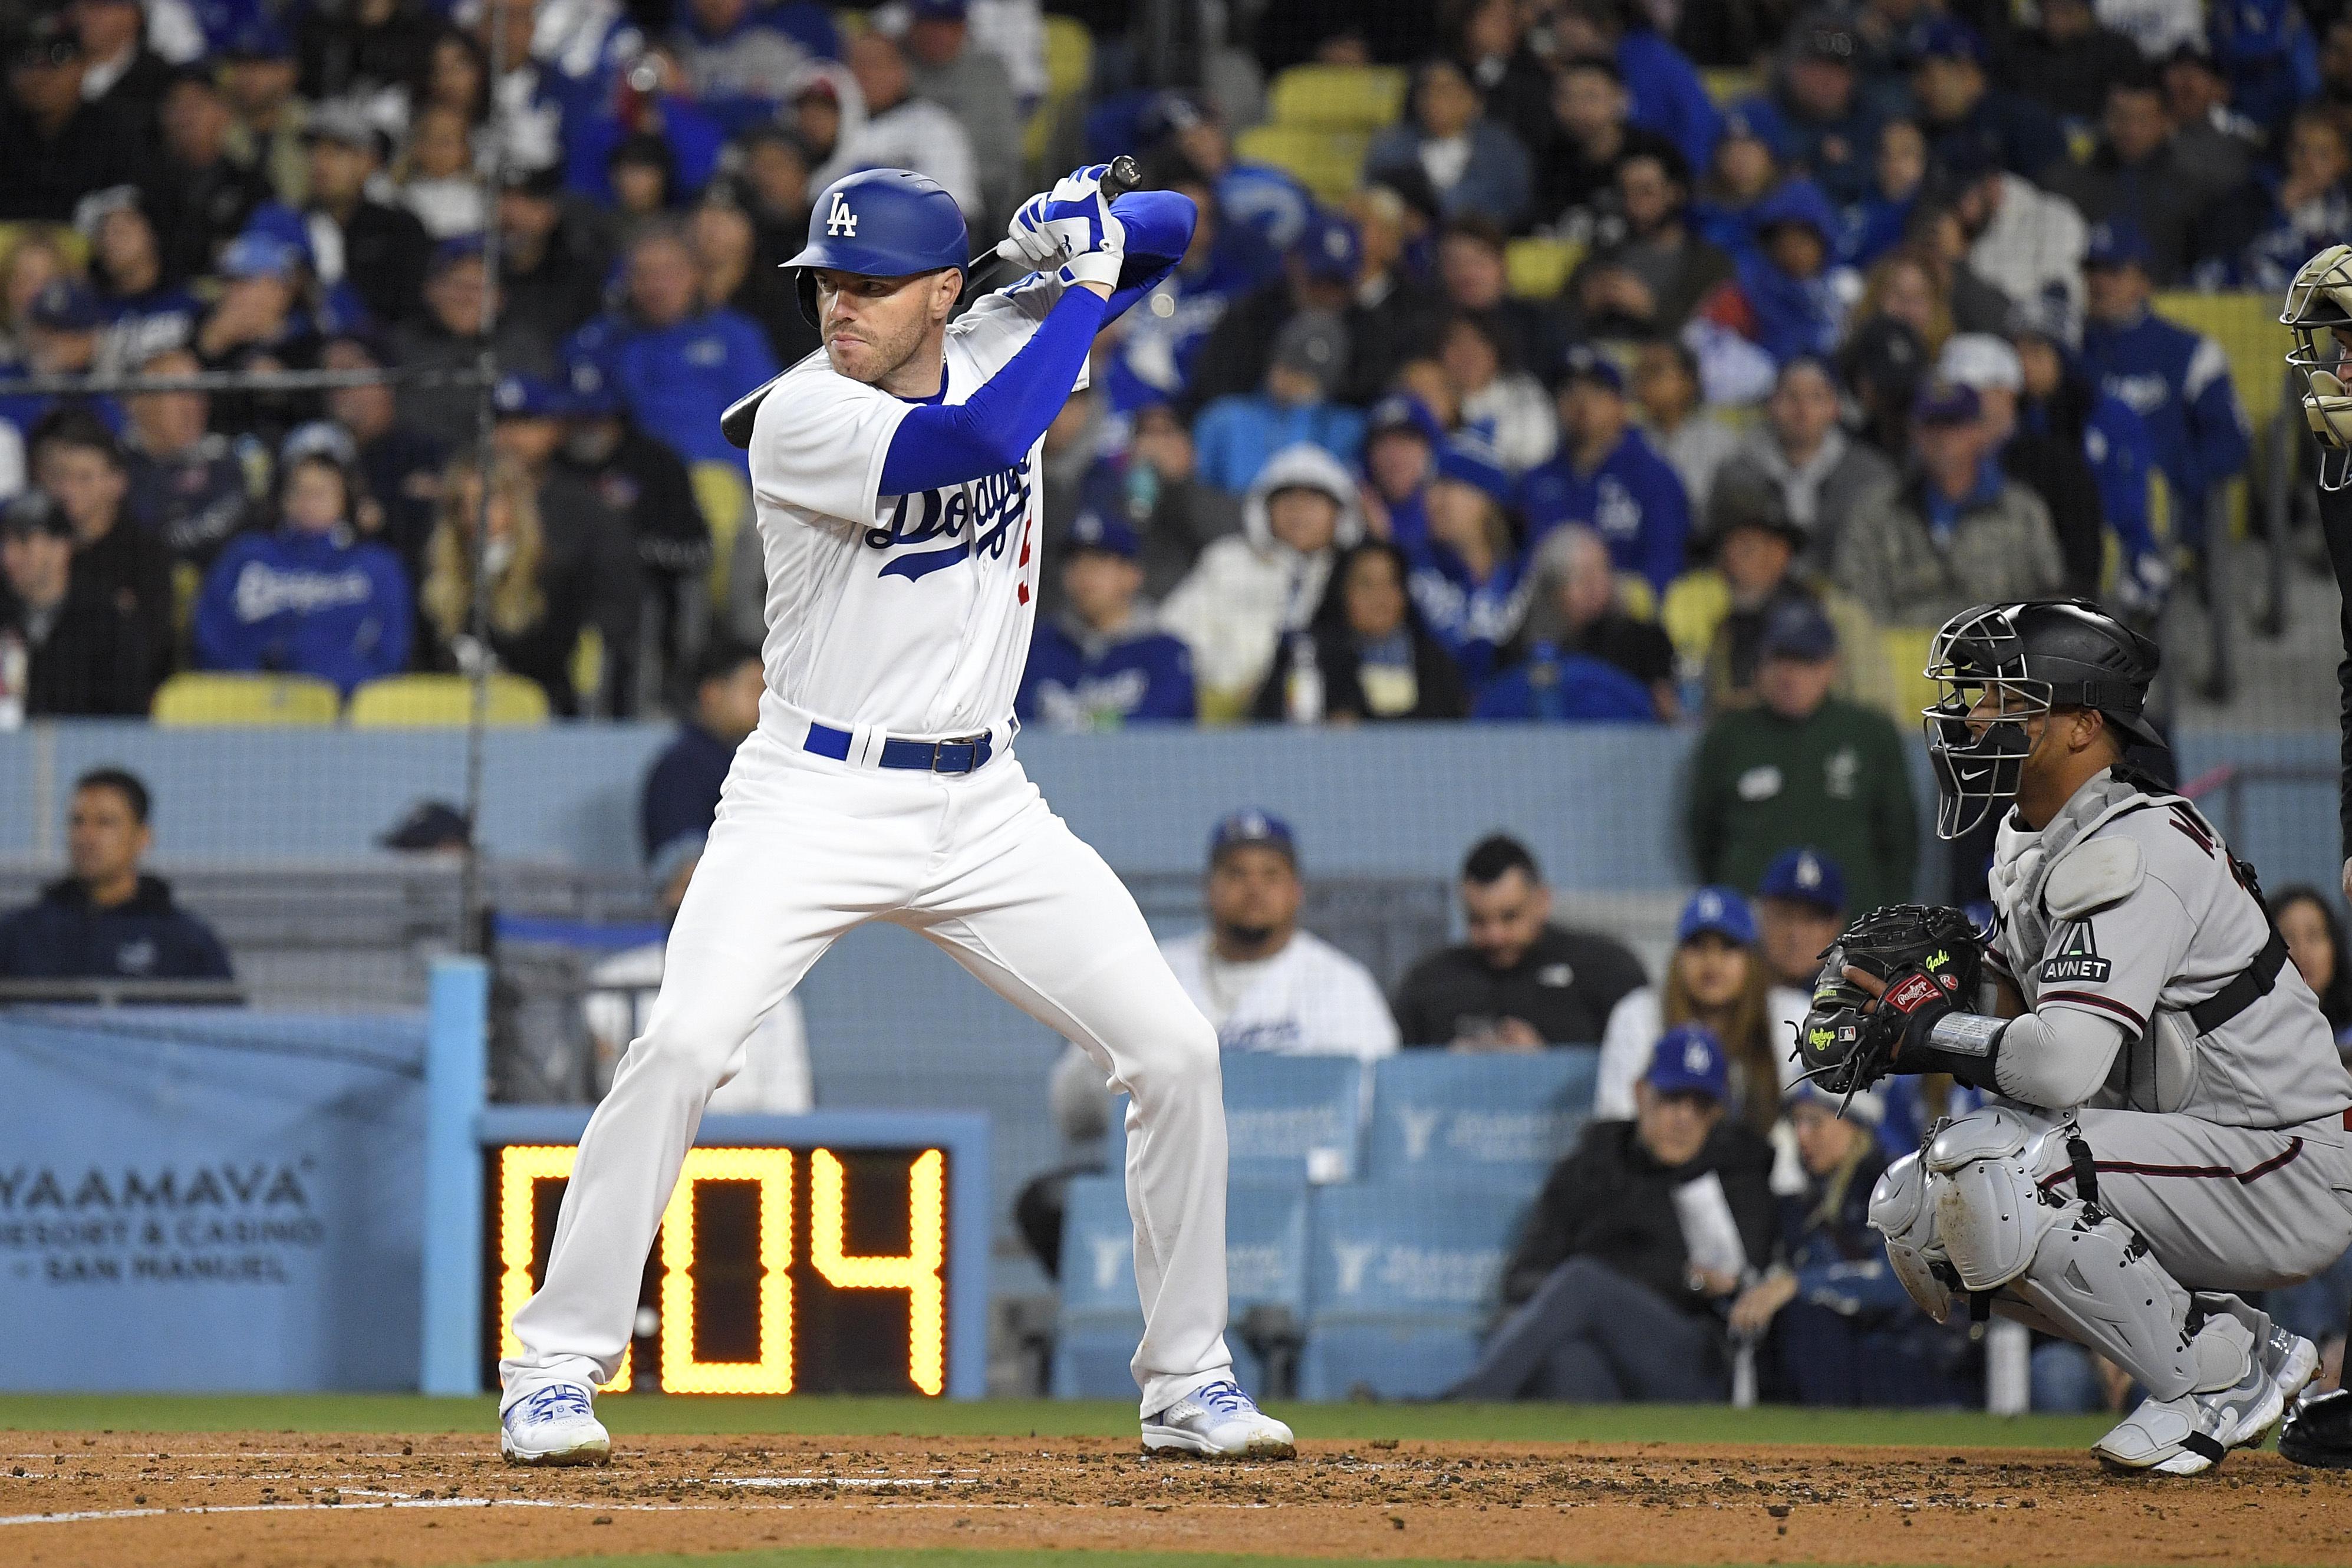 WATCH: Chicago Cubs' Cody Bellinger Gets Pitch Clock Violation